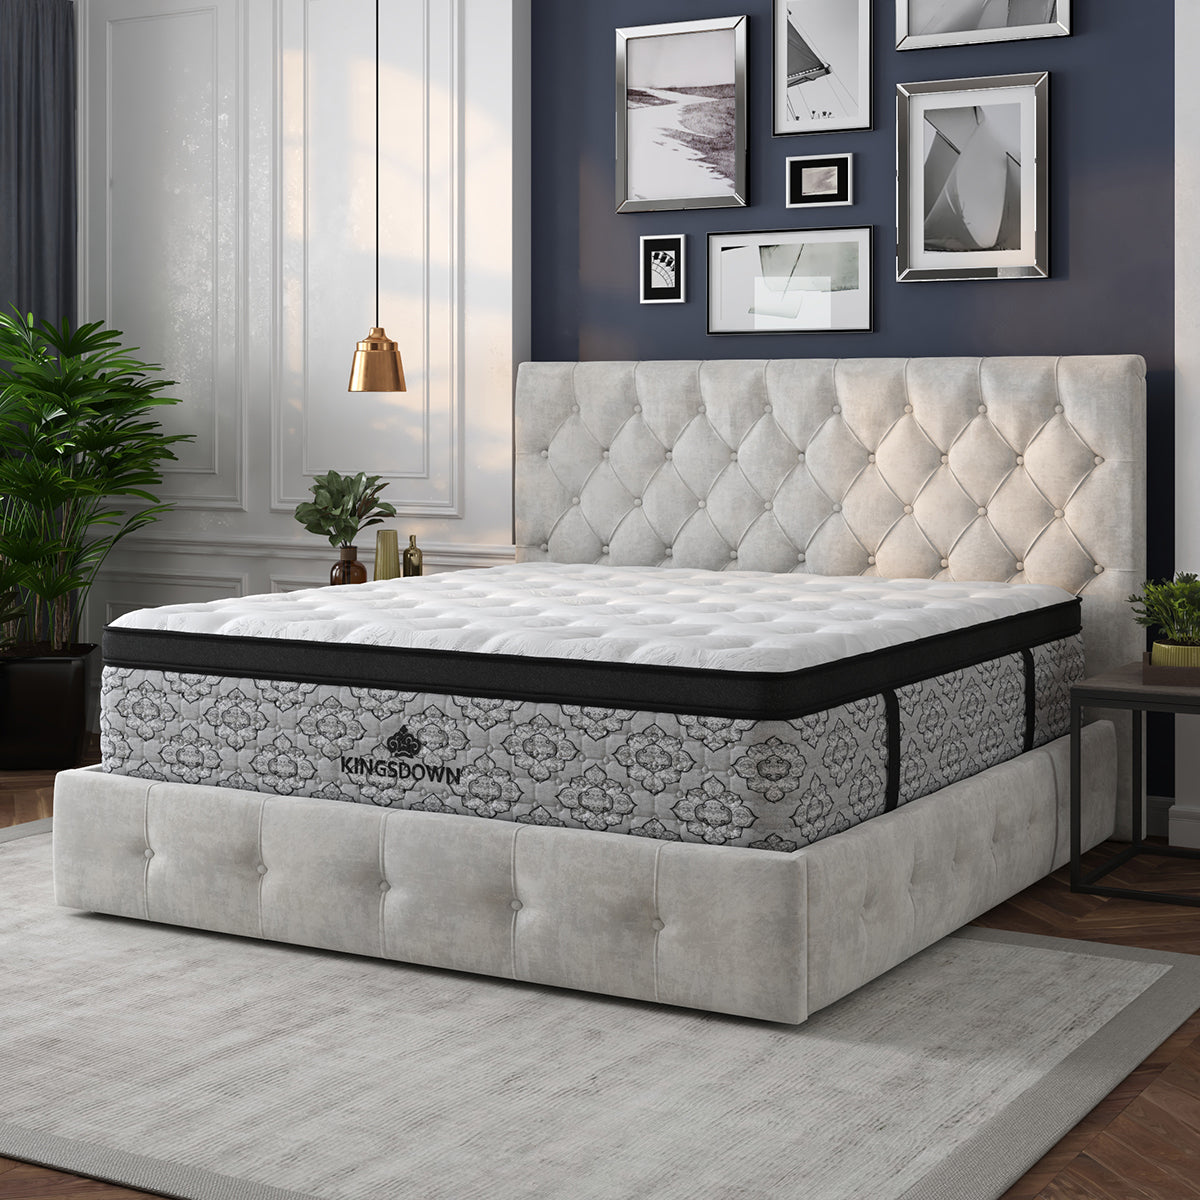 Picture of Kingsdown Holly Trace Hybrid Cushion Eurotop Mattress